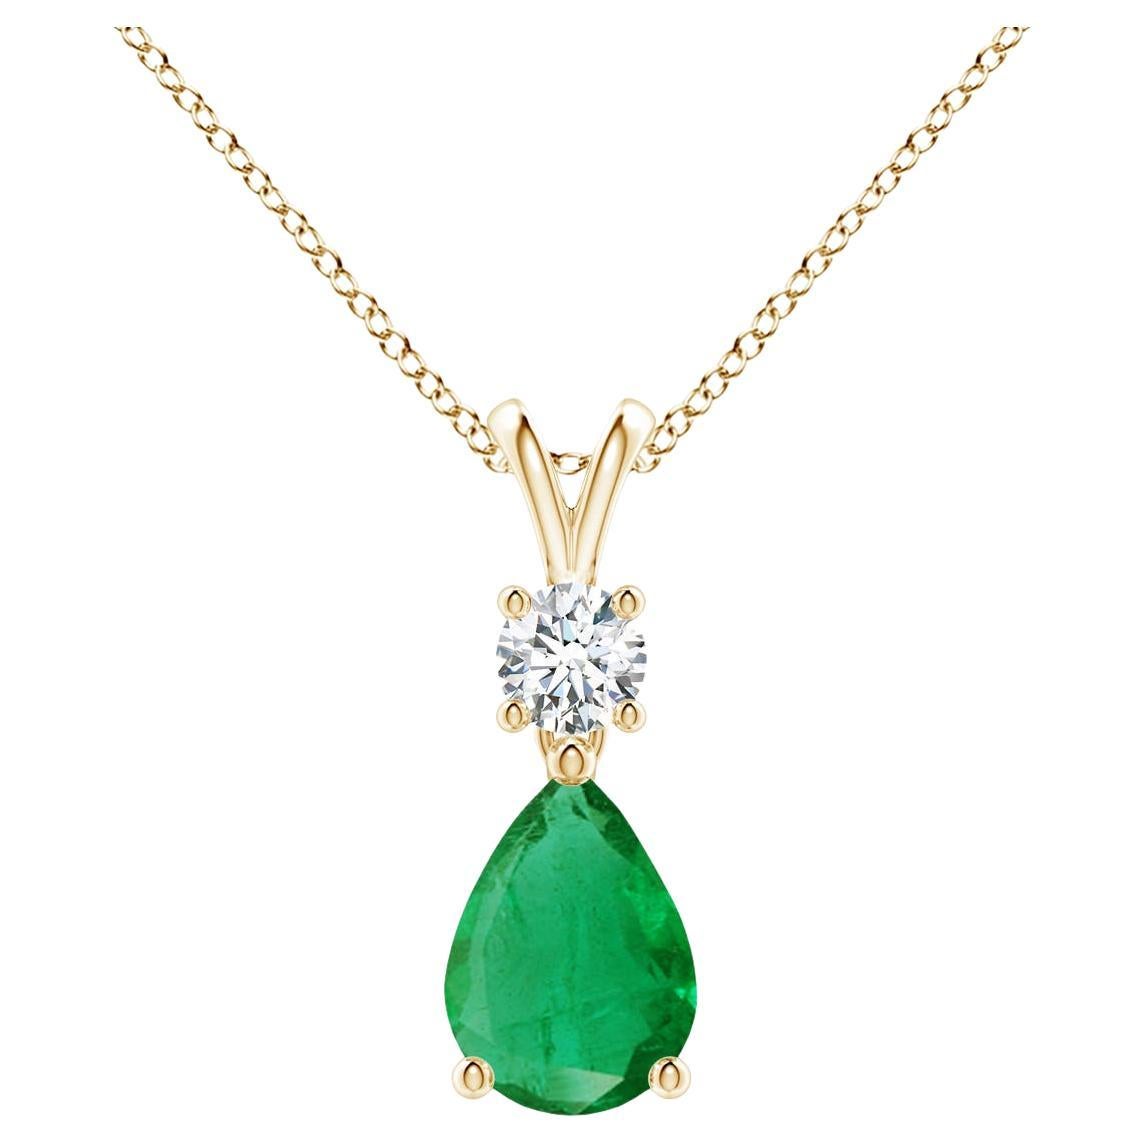 Natural Pear-Shaped Emerald V-Bale Pendant in 14K Yellow Gold Size-7x5mm